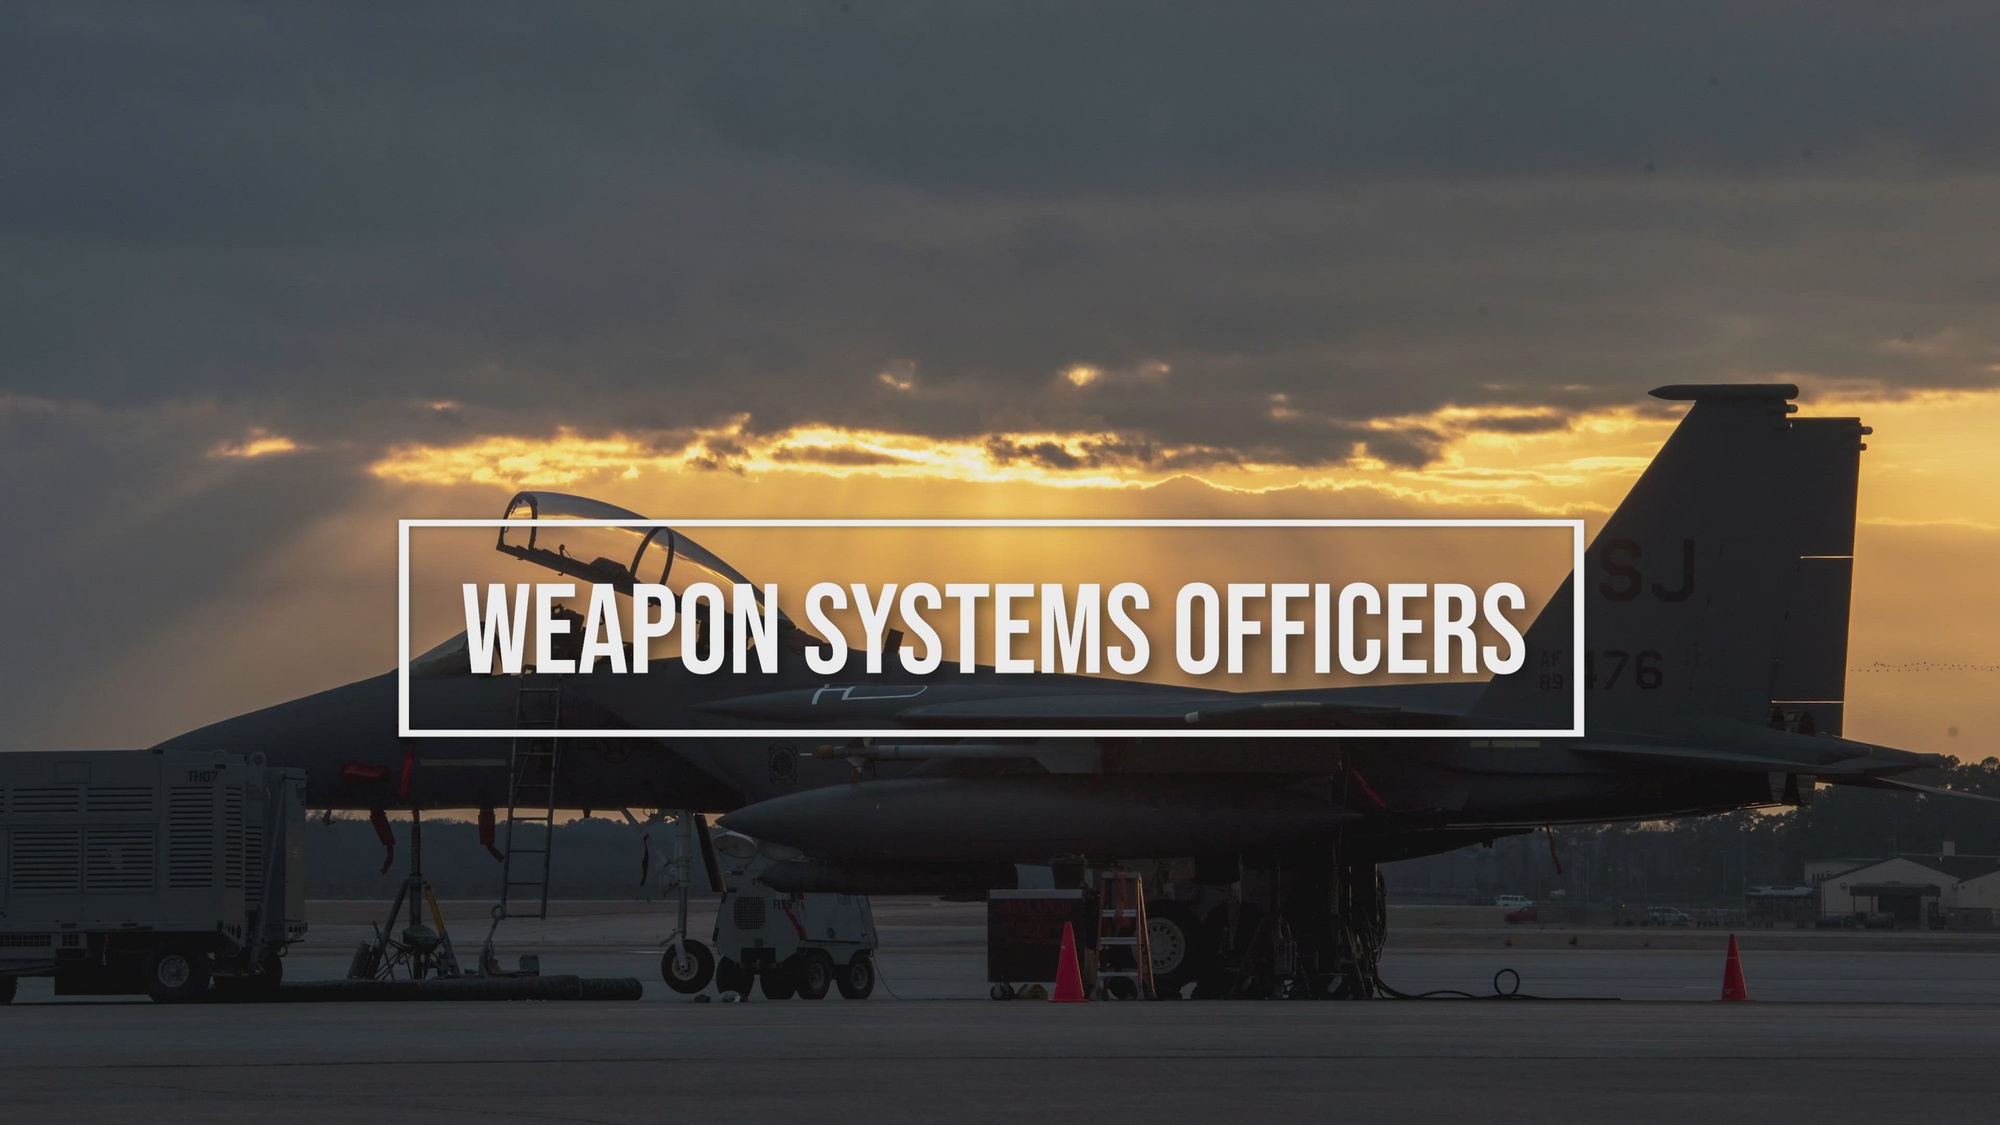 Video about the history and the importance of weapon systems officers 